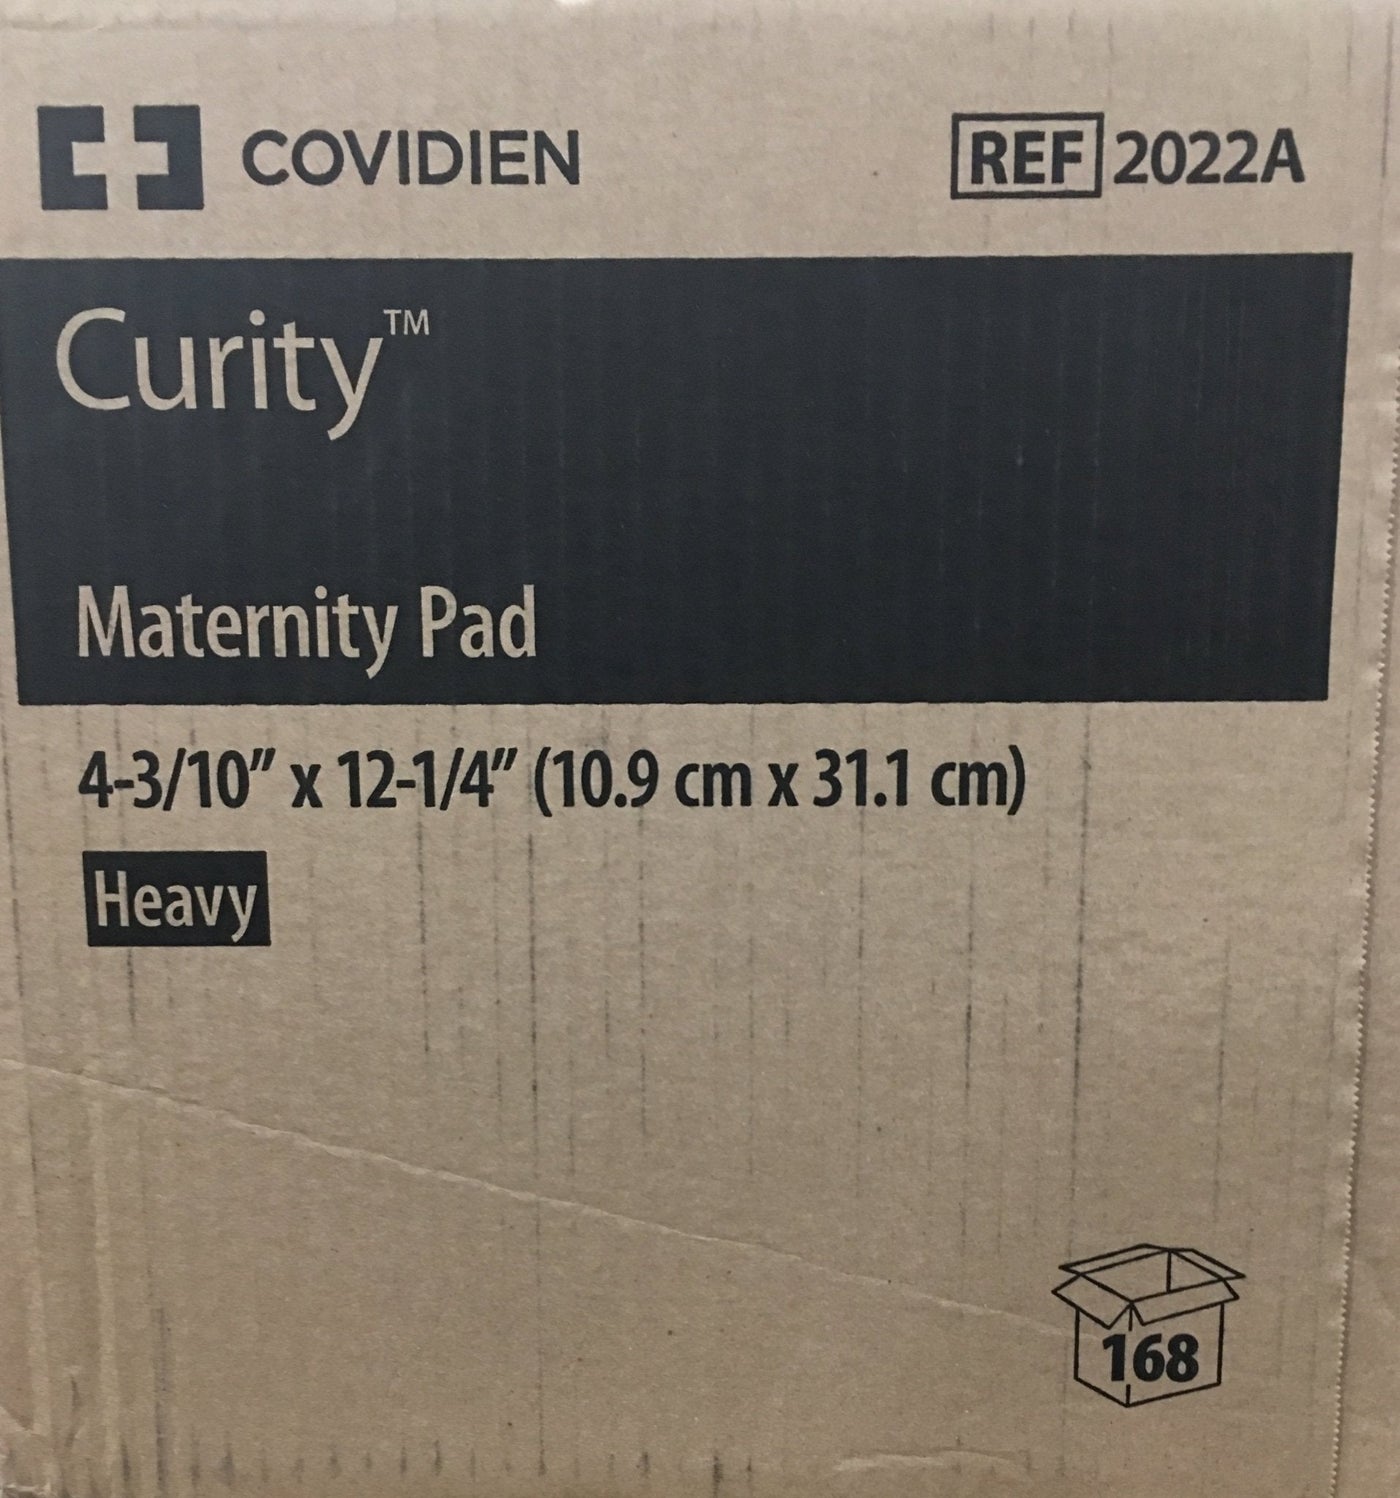 Medicare Maternity Pads - 10 Pack : Next Day Delivery